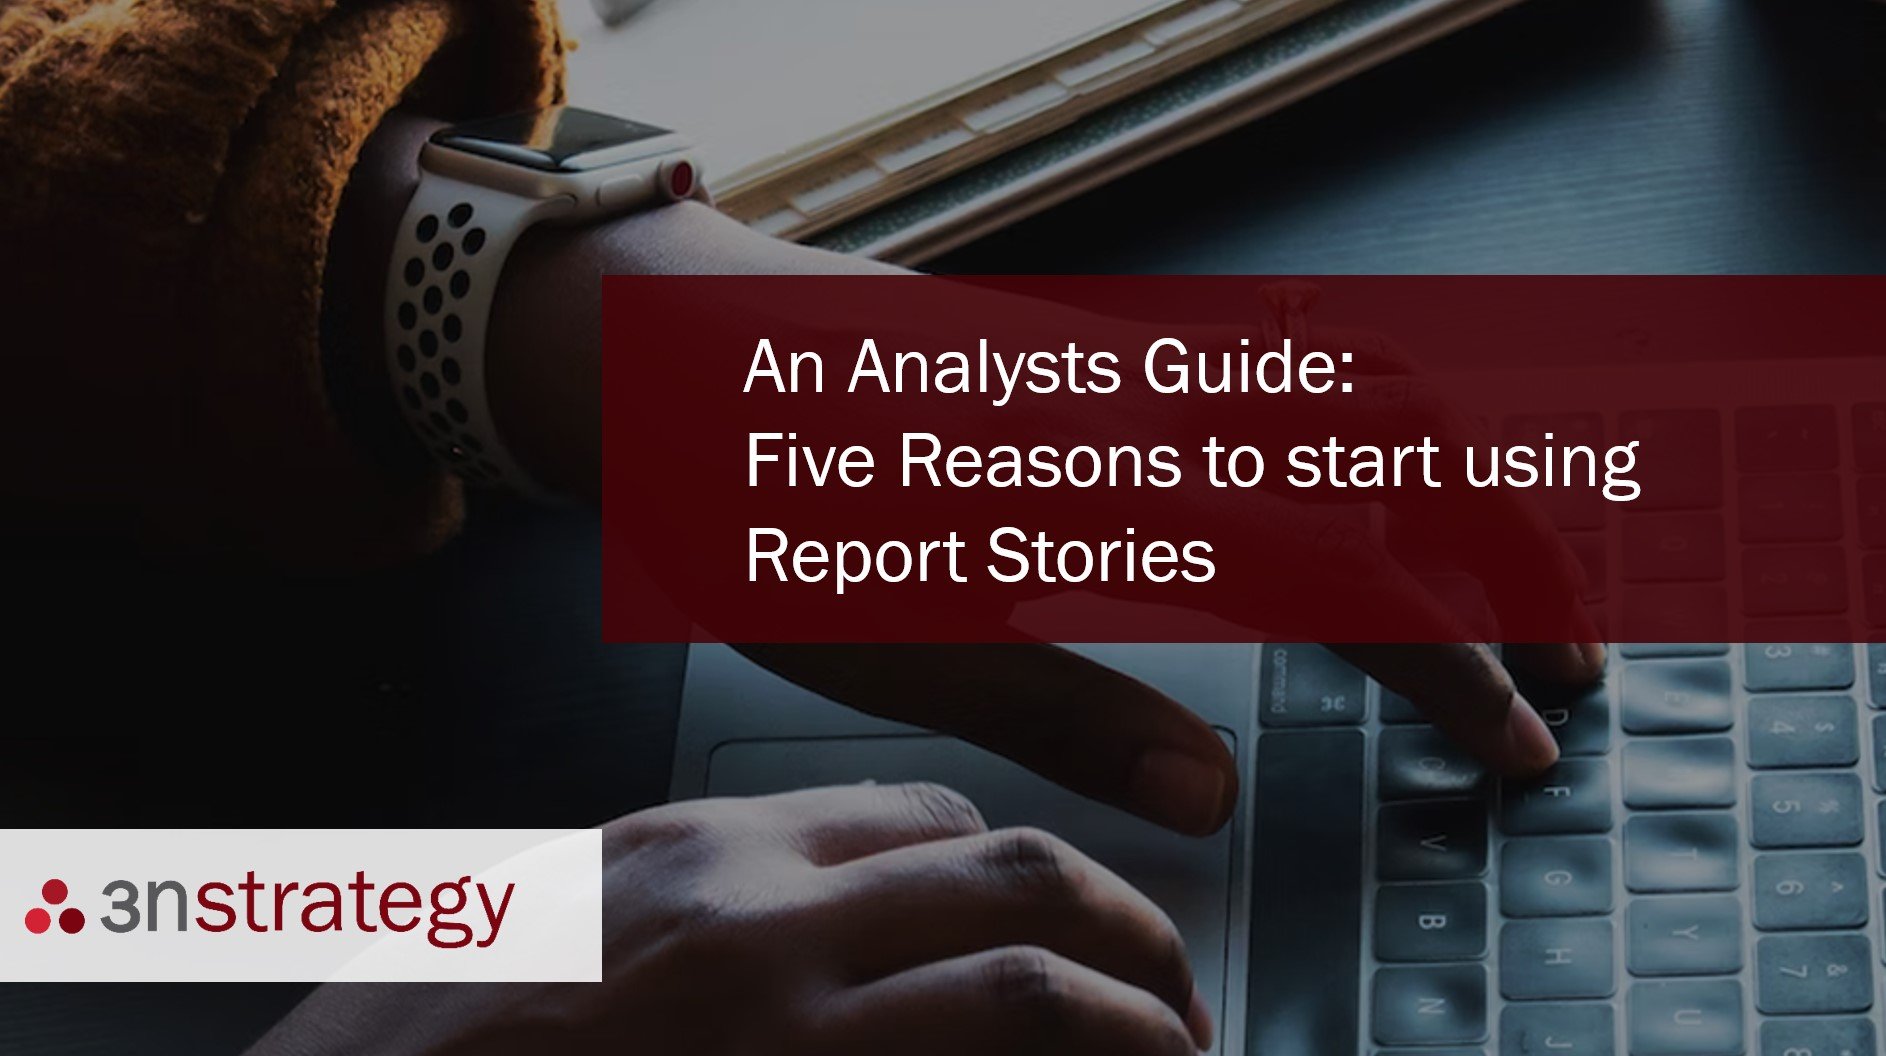 3n Strategy An Analysts Guide Five Reasons to start using Report Stories